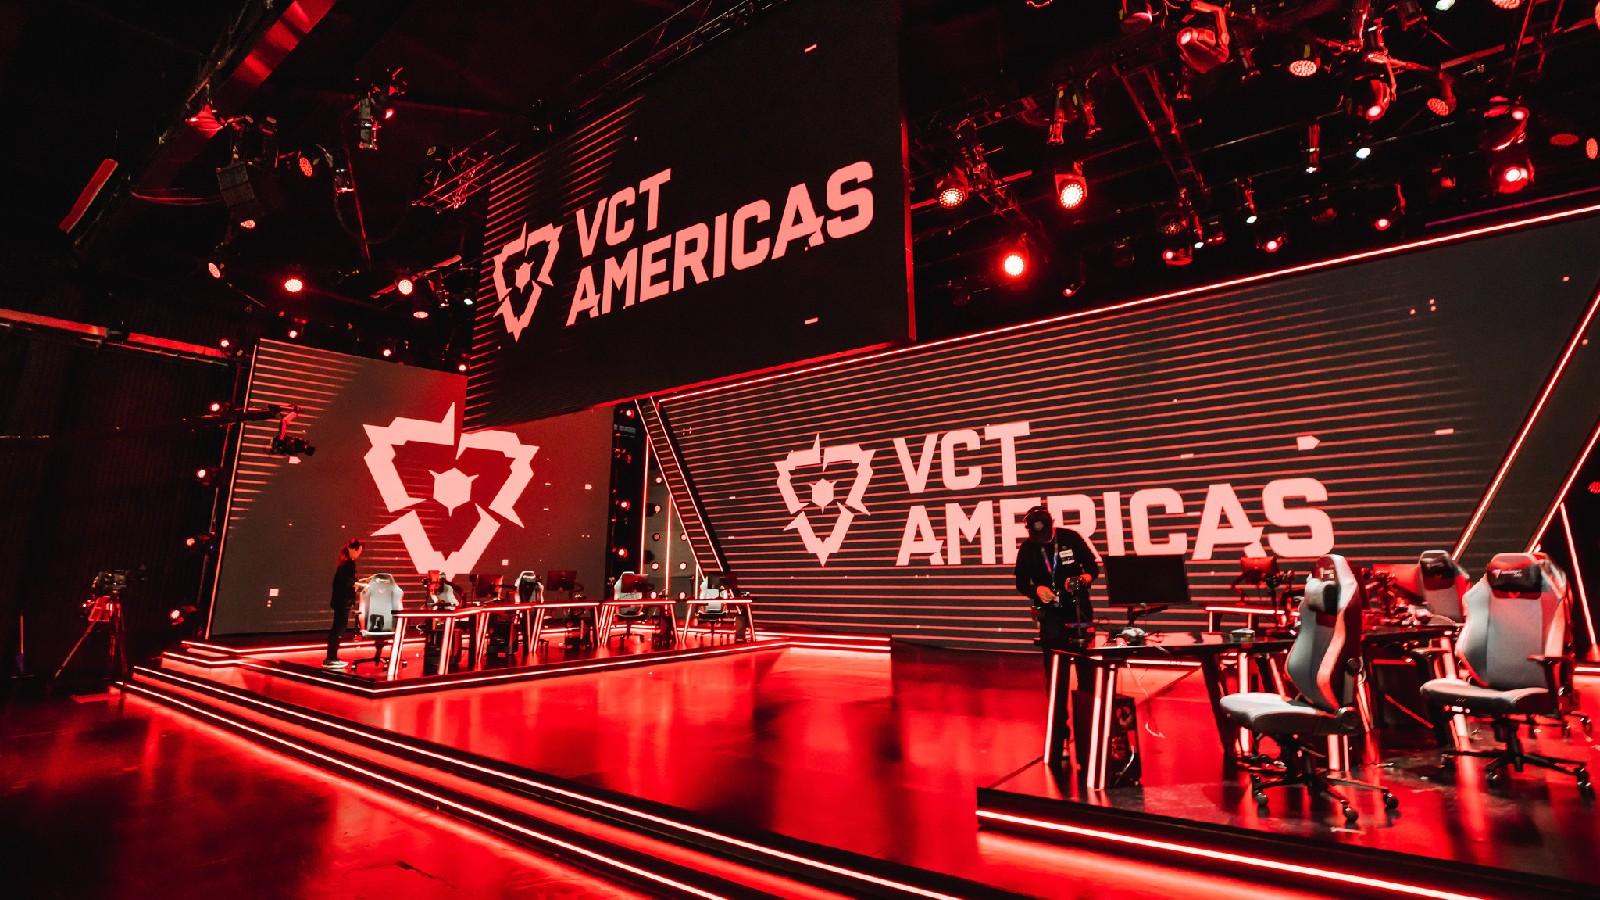 VCT Americas stage